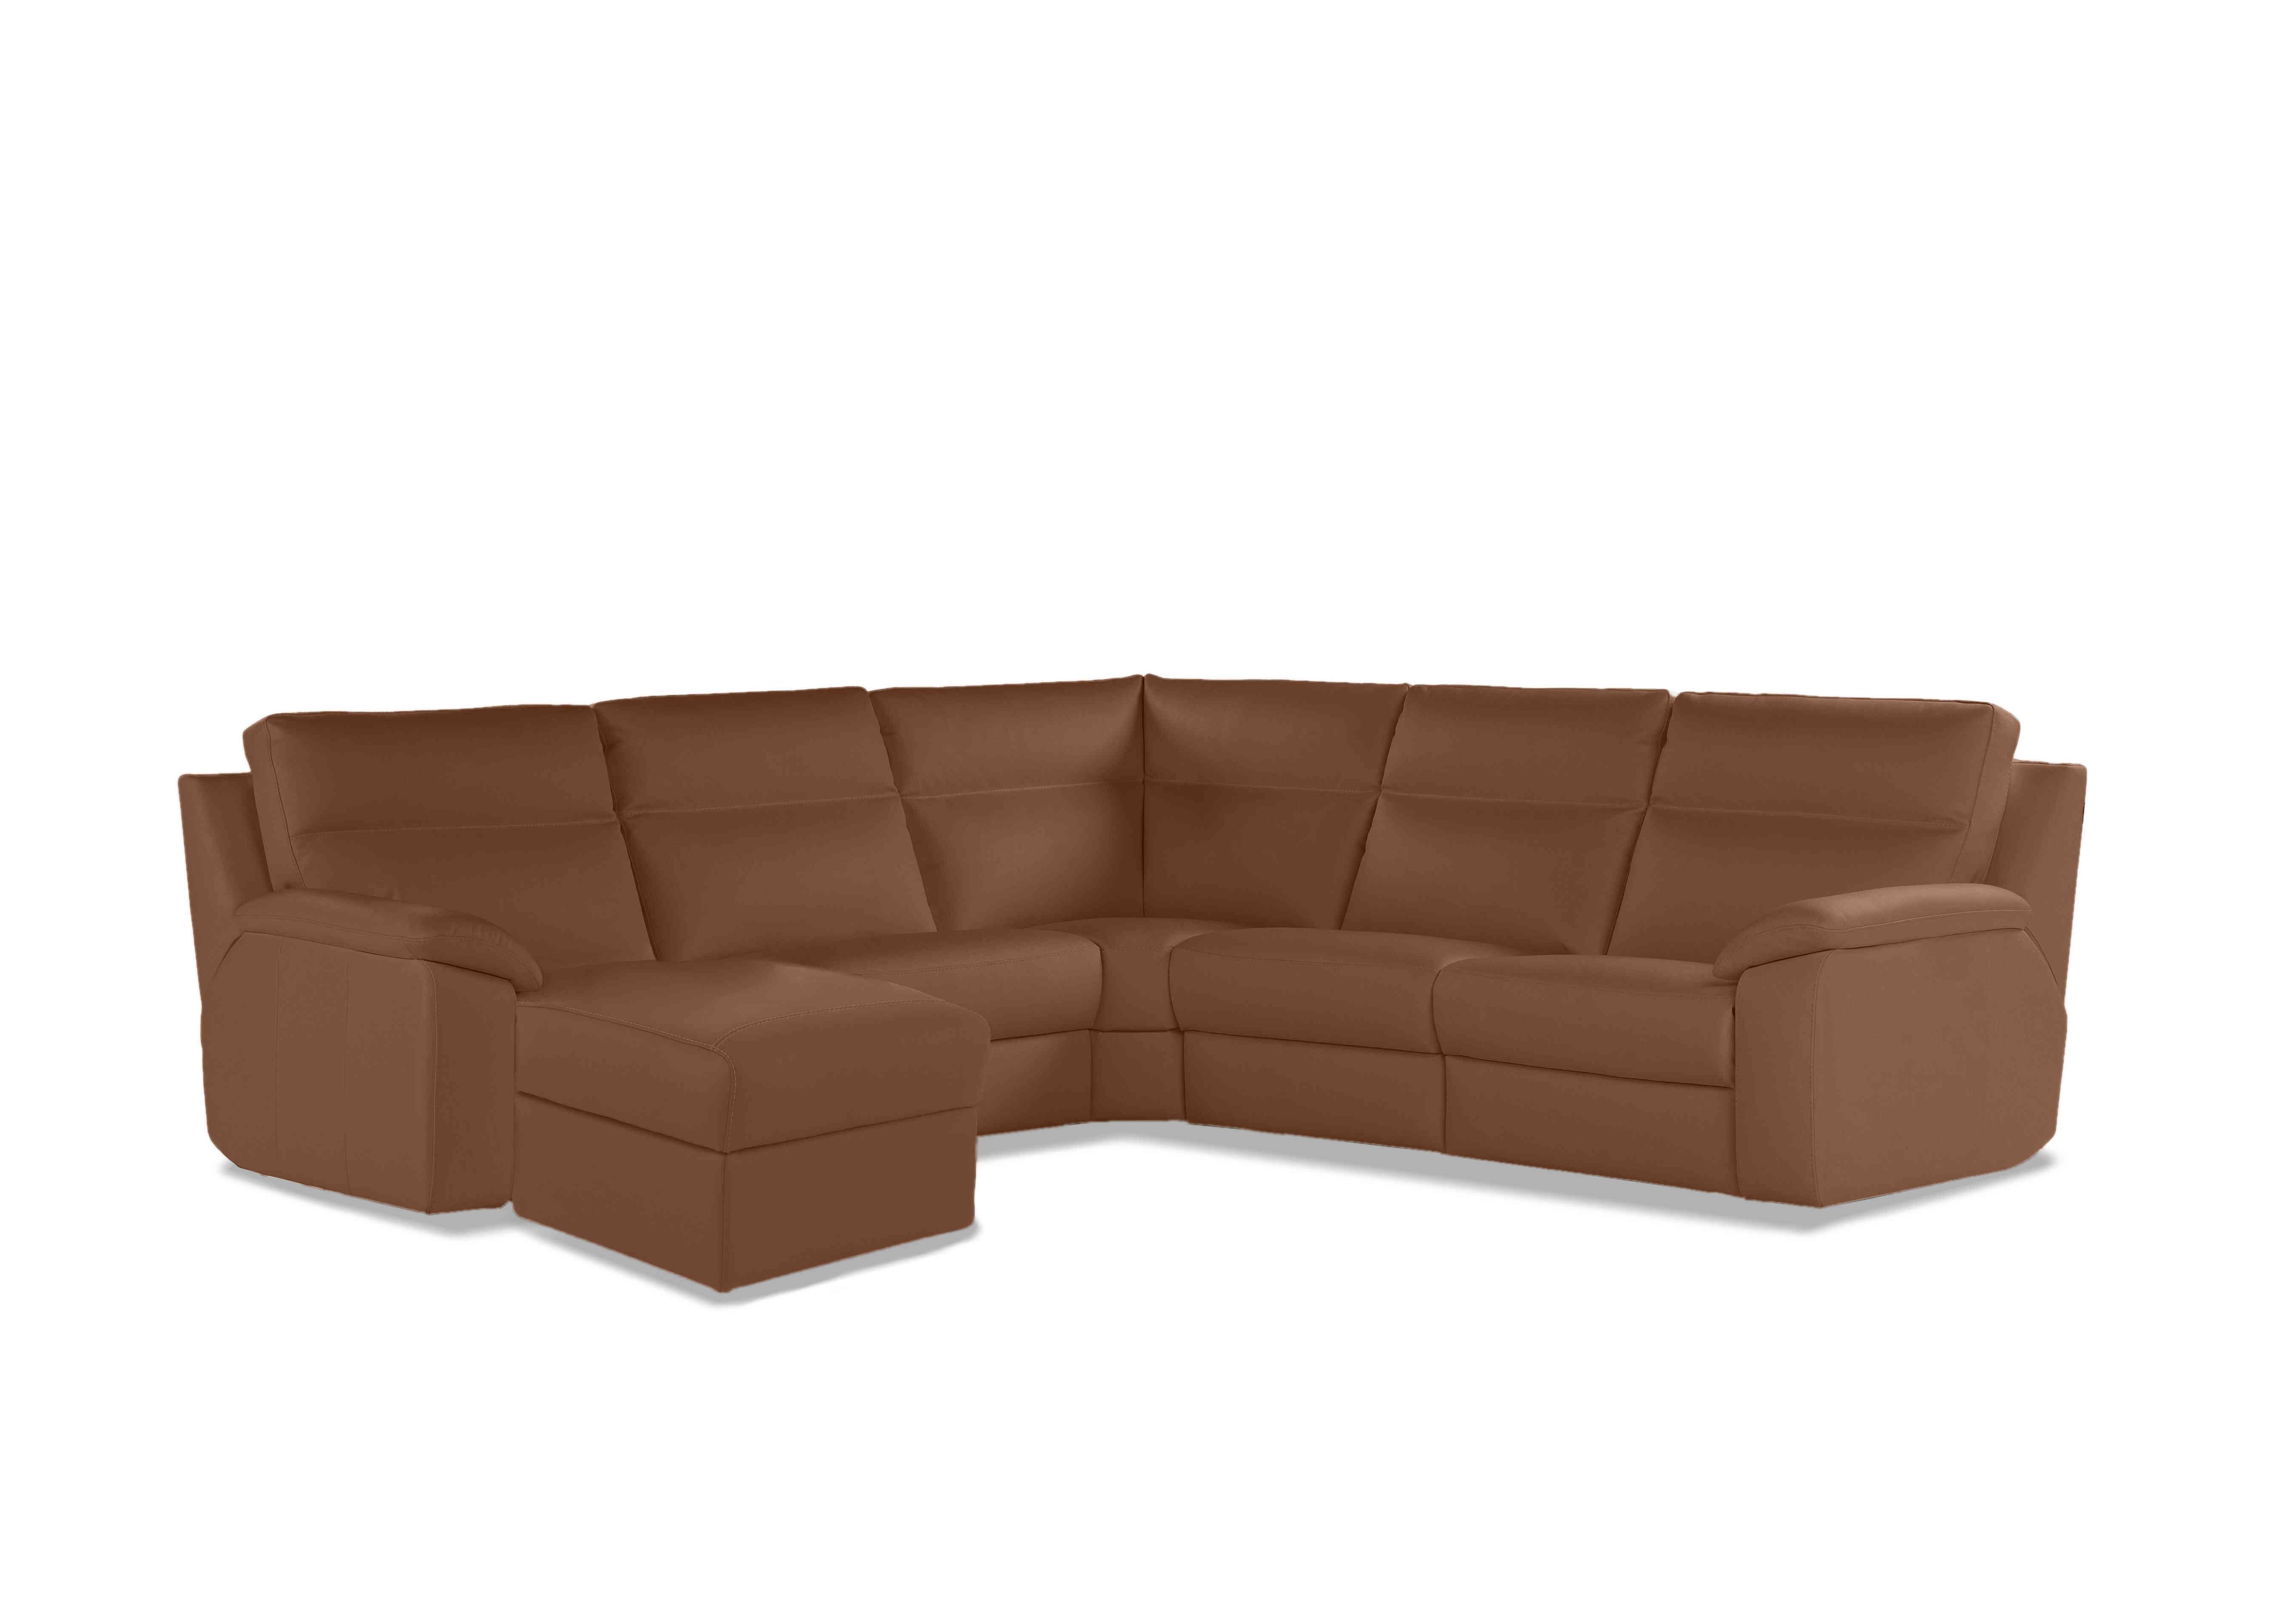 Pepino Large Leather Corner Sofa with Chaise End in 363 Torello Cognac on Furniture Village